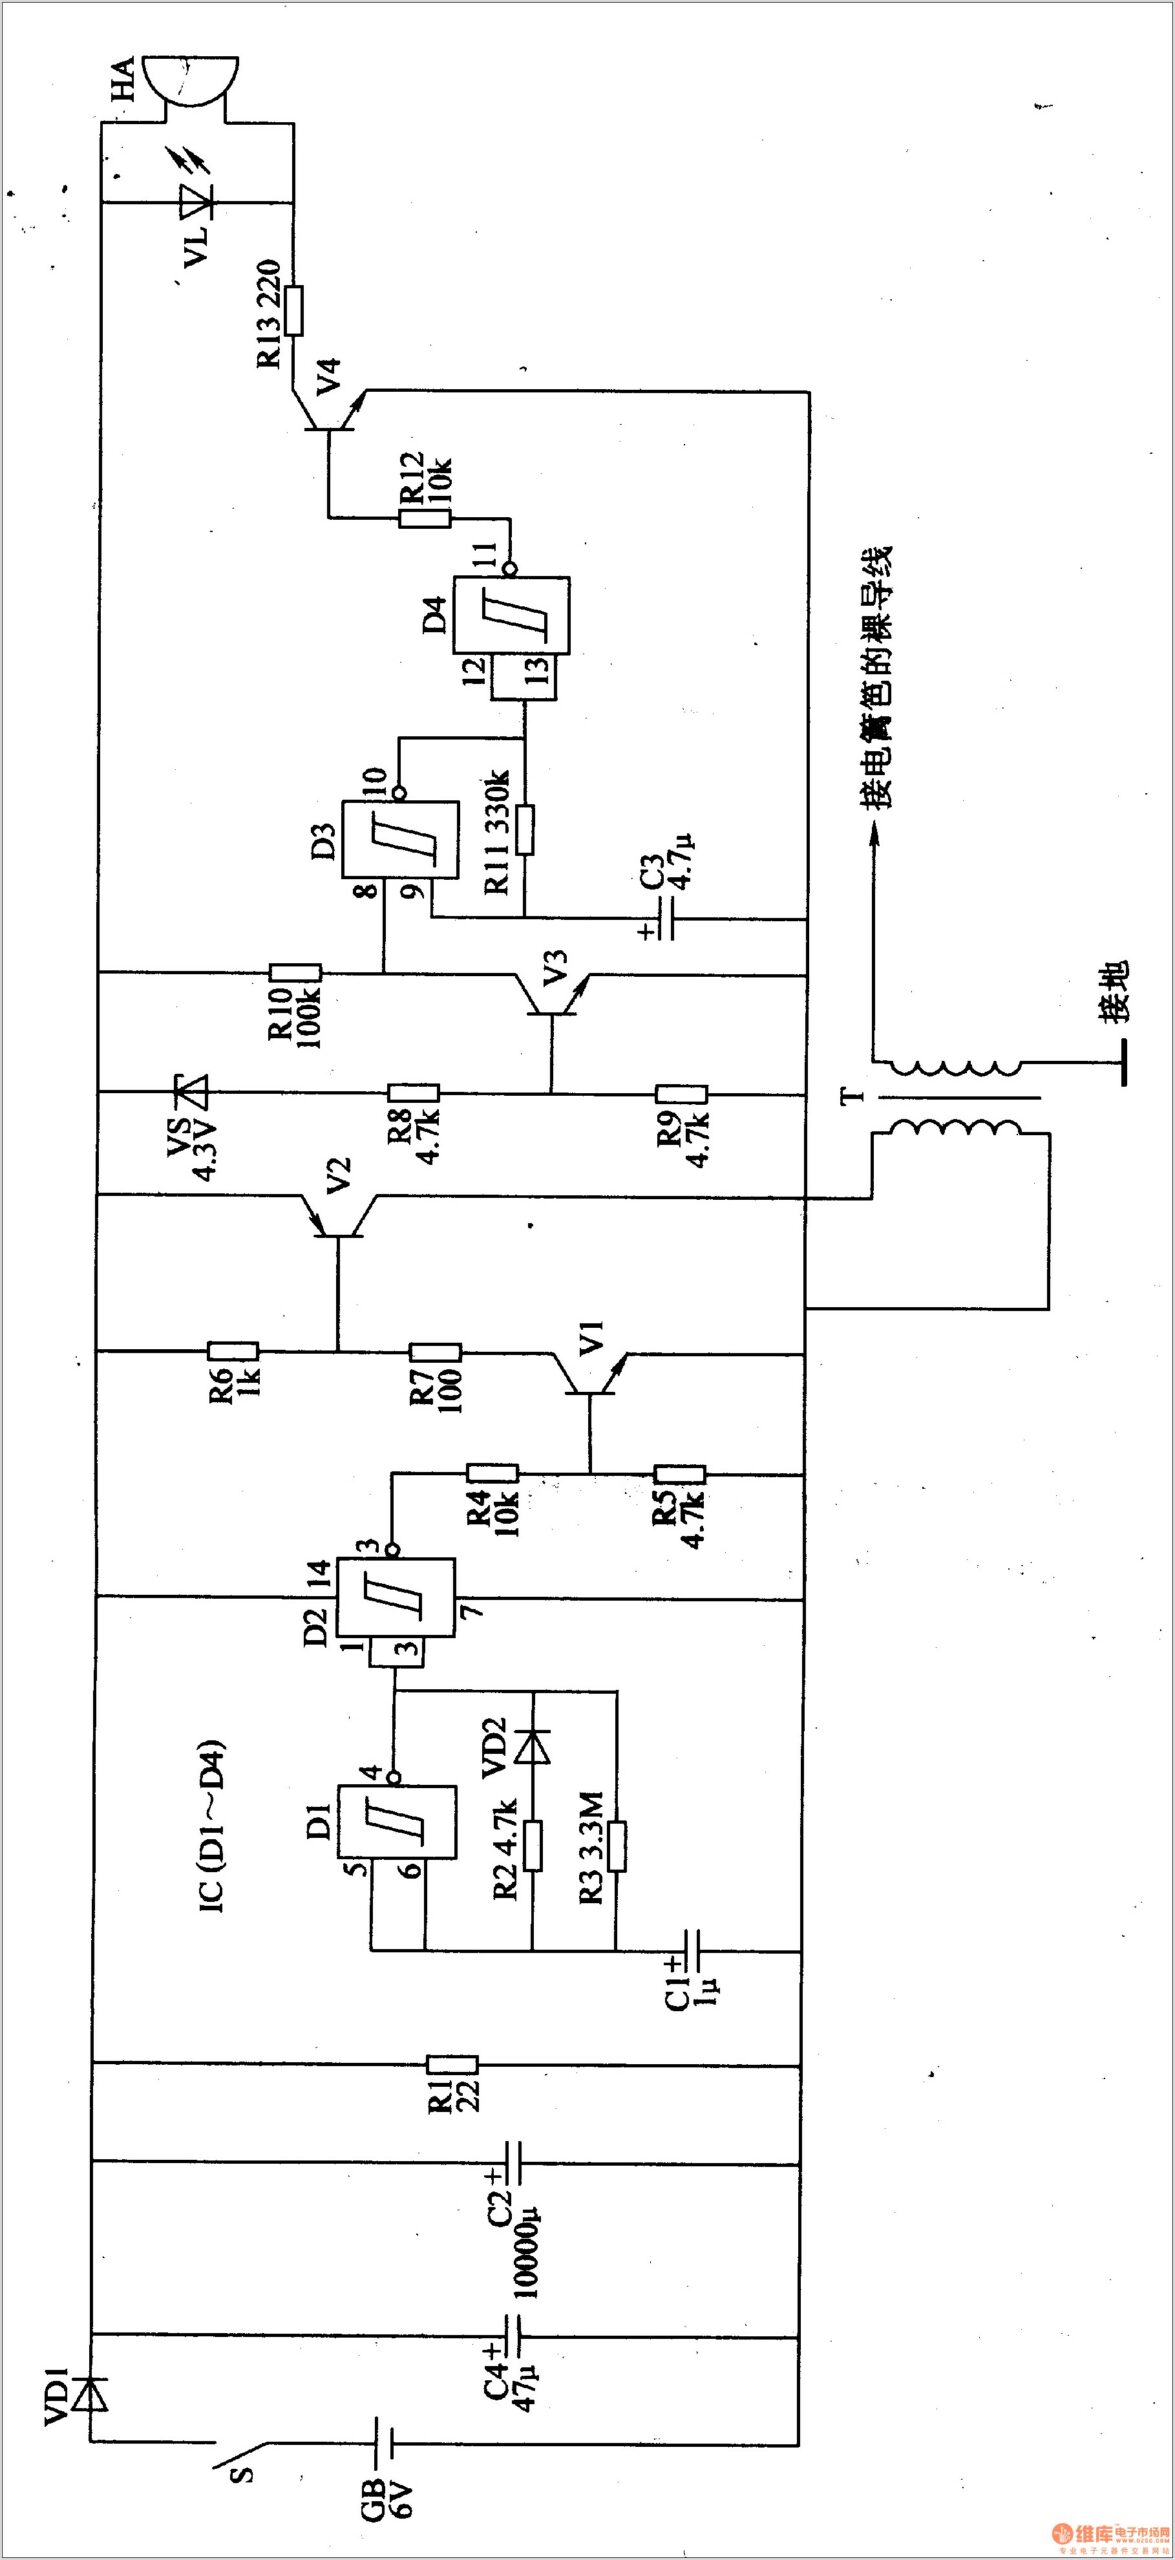 Electric Fence Tester Circuit Diagram